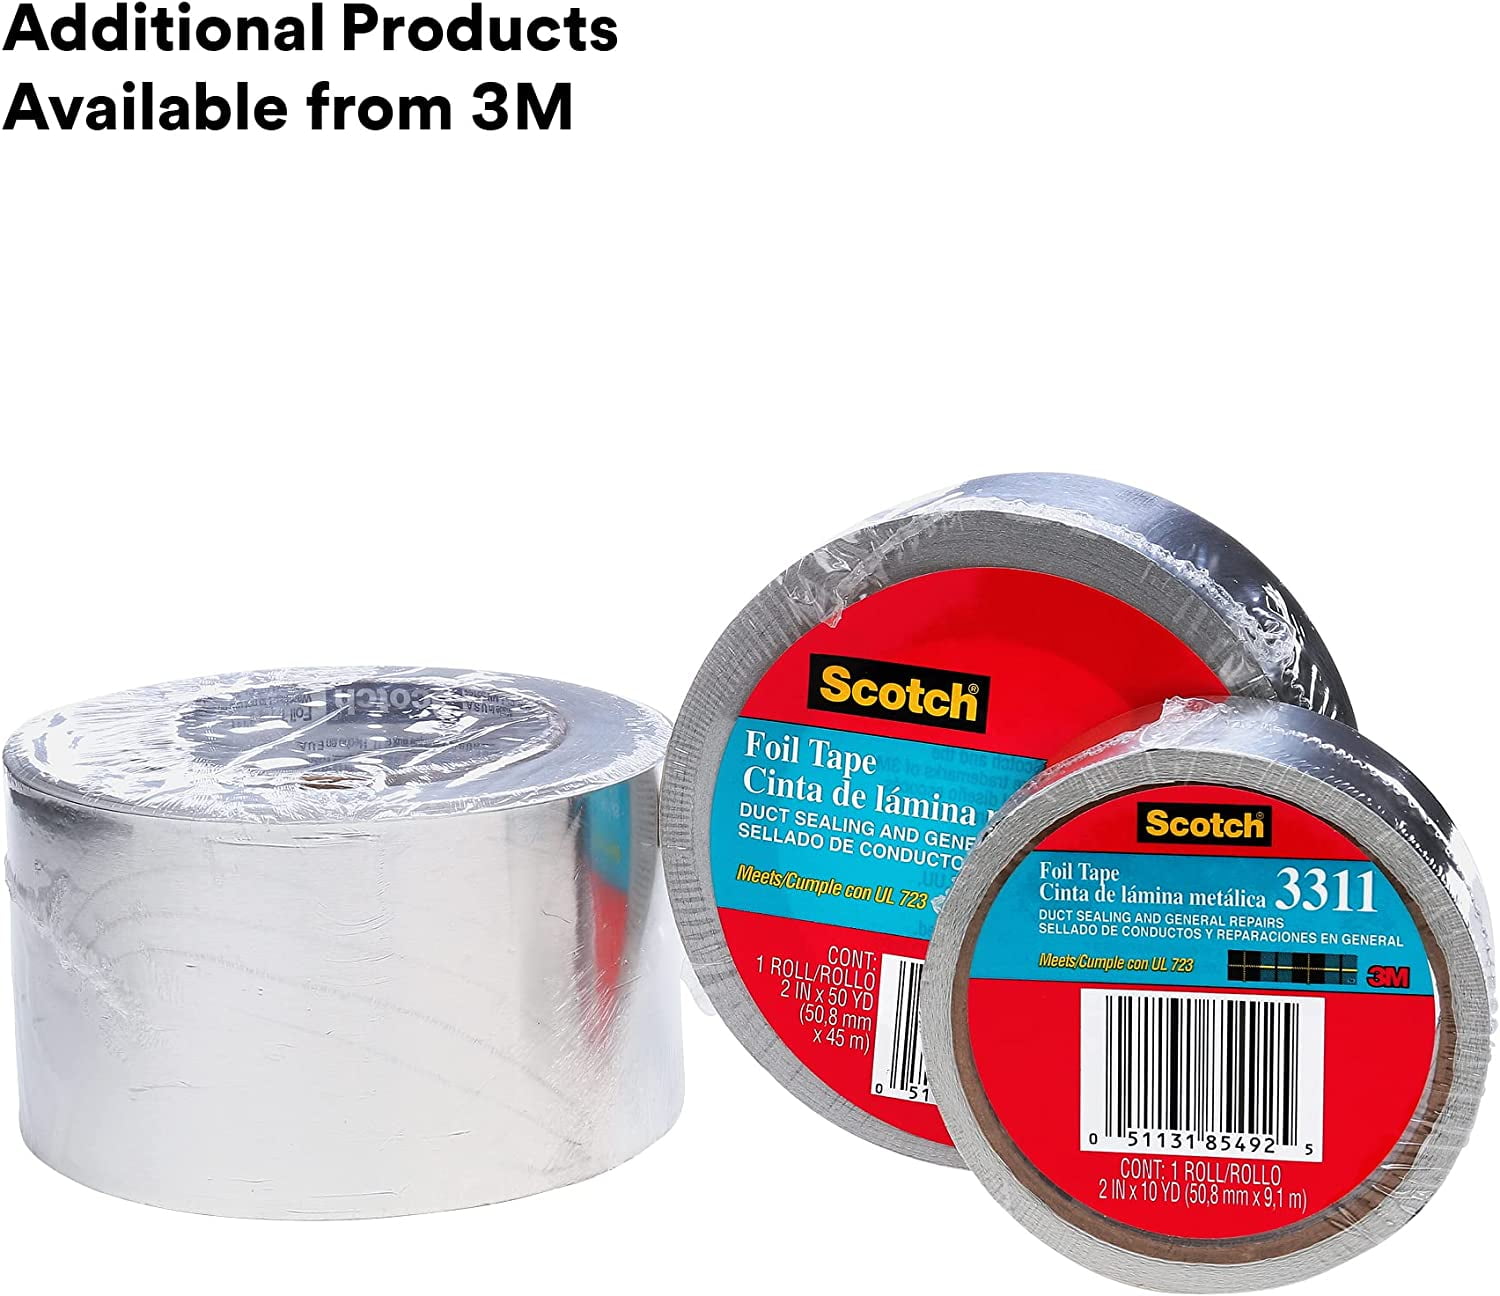 ADO Products 2 in. x 50 yds. Aluminum Foil Tape Roll TF25012 - The Home  Depot